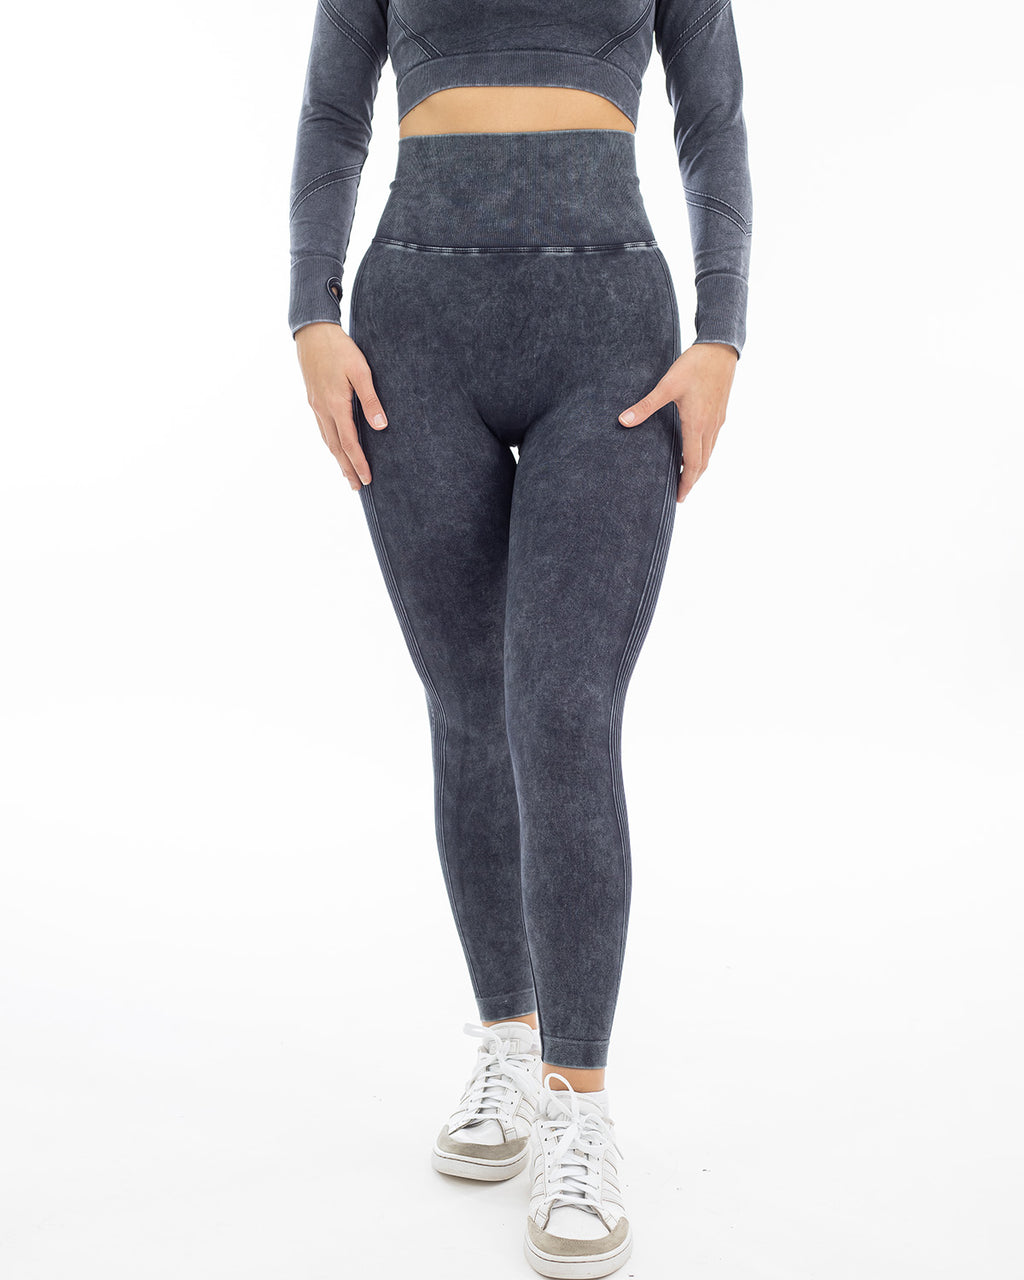 Women's Contour Curvy High-Rise Leggings with Power Waist - All in